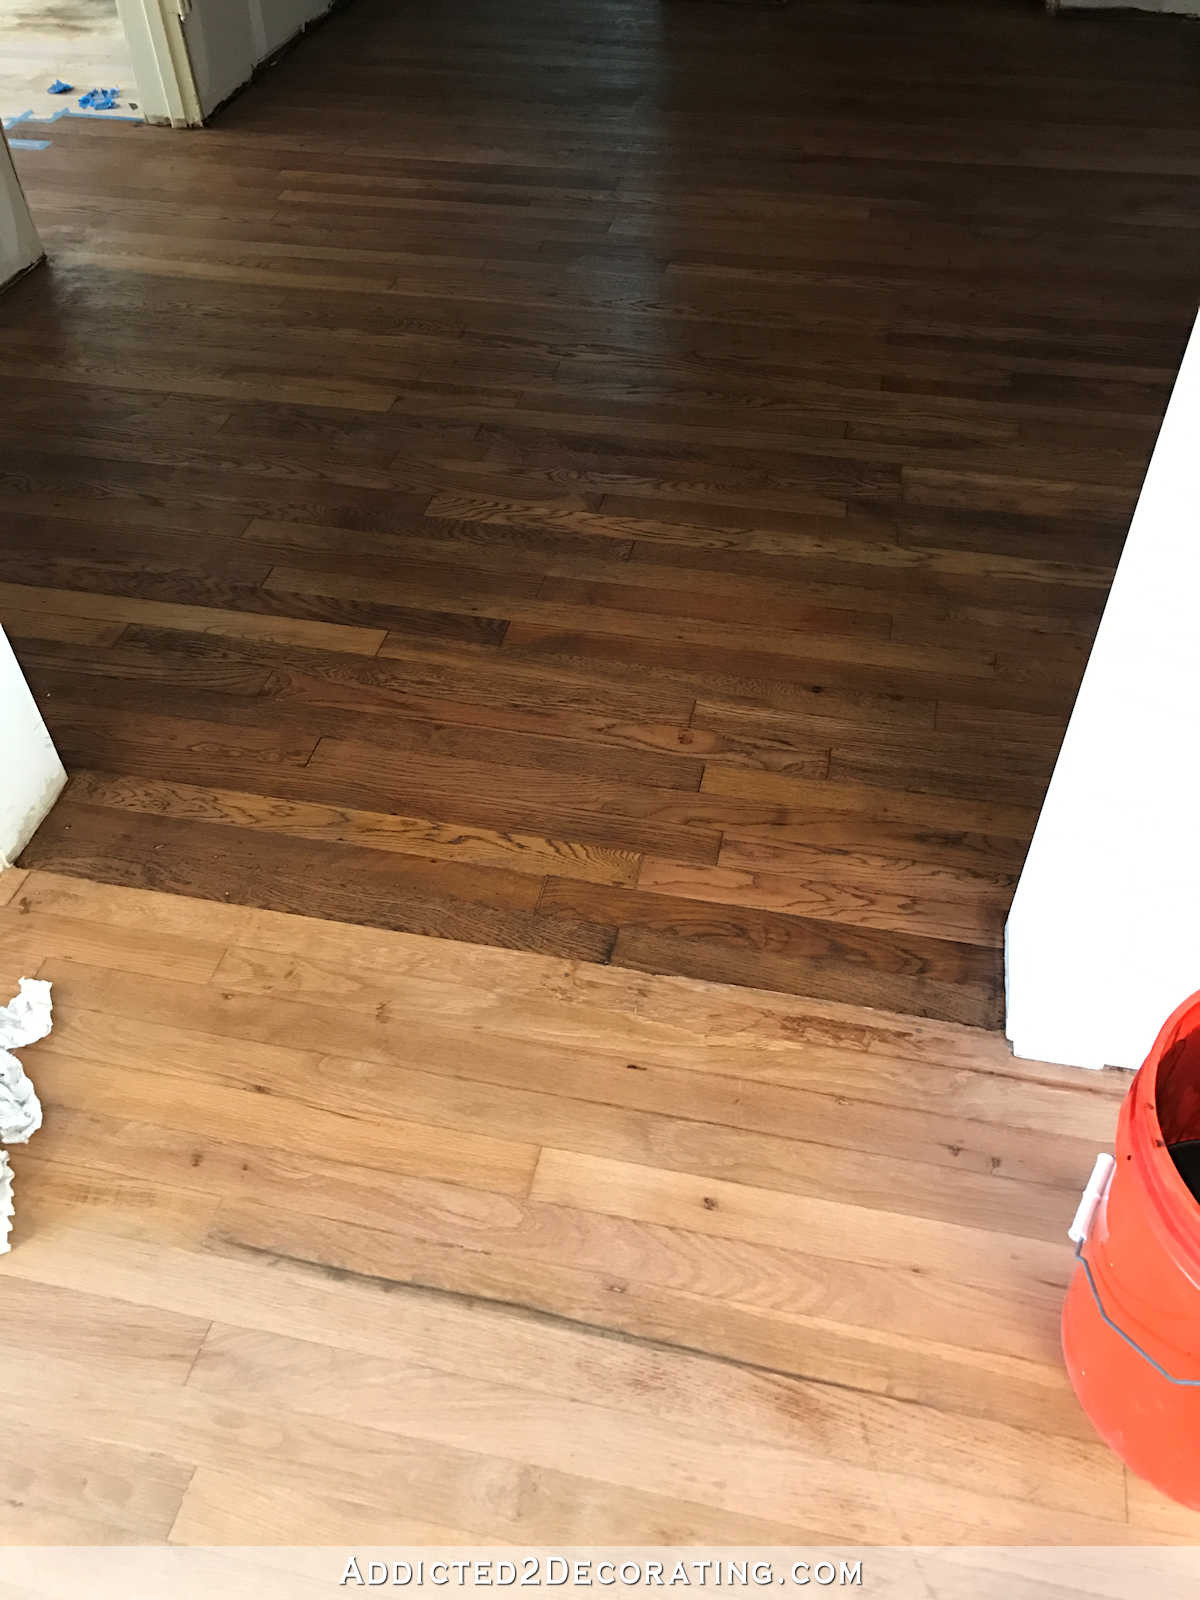 16 Lovely Price for Sanding and Refinishing Hardwood Floors 2022 free download price for sanding and refinishing hardwood floors of adventures in staining my red oak hardwood floors products process pertaining to staining red oak hardwood floors 2 tape off one section 